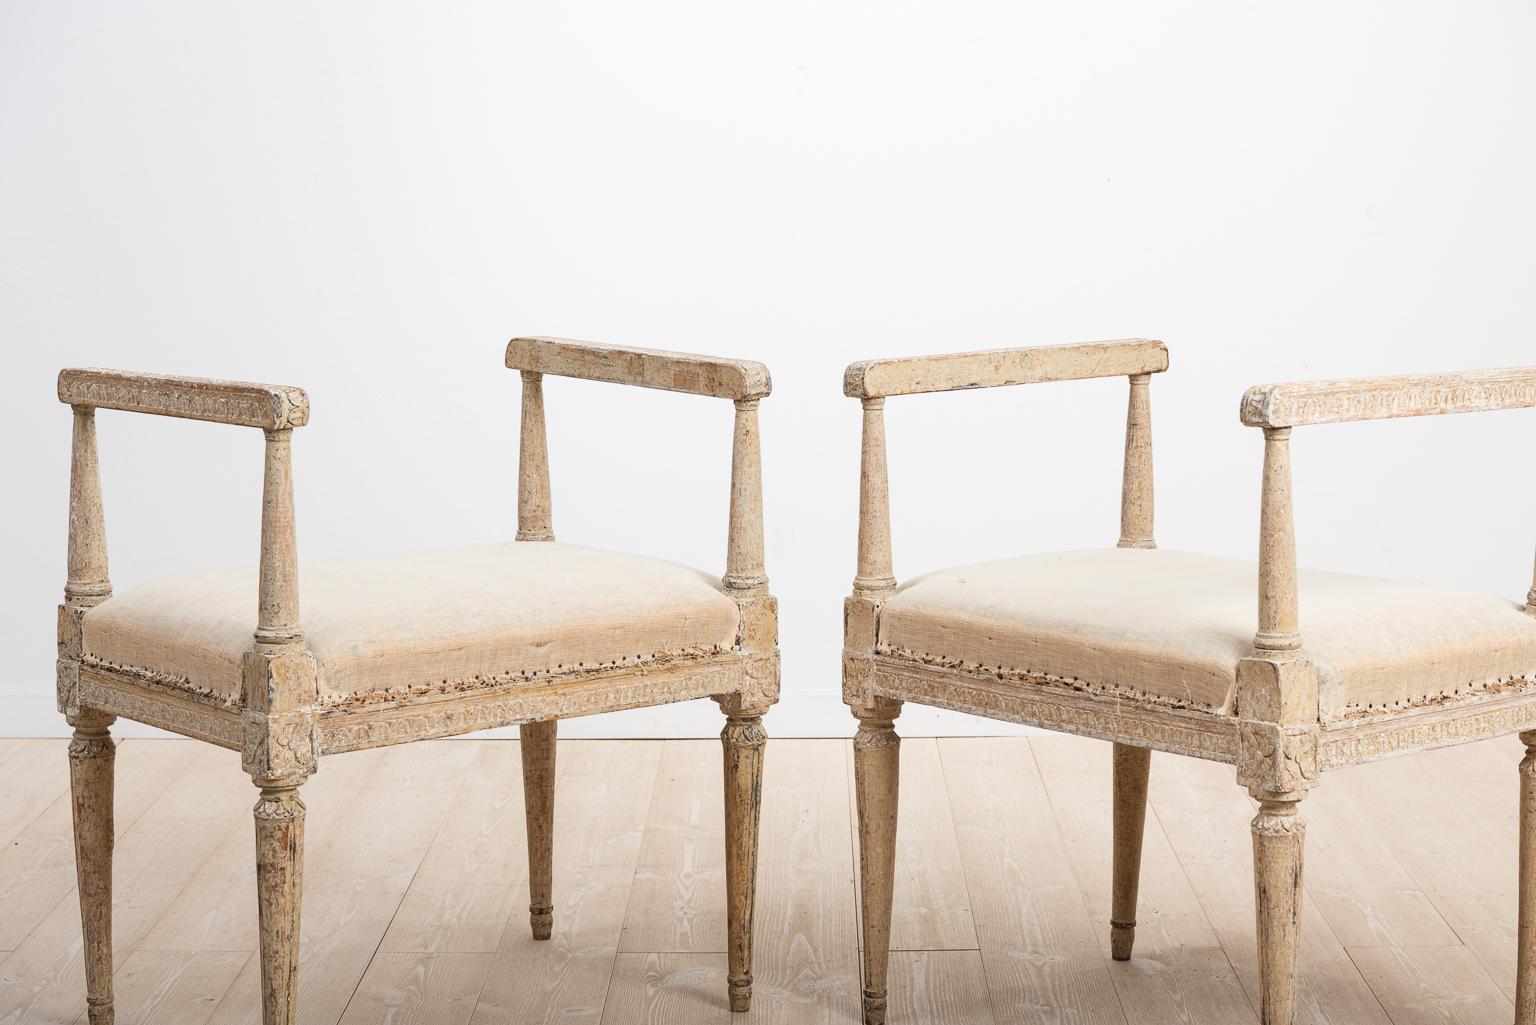 Hand-Painted Two Richly Decorated Gustavian Banquettes Manufactured, 1780